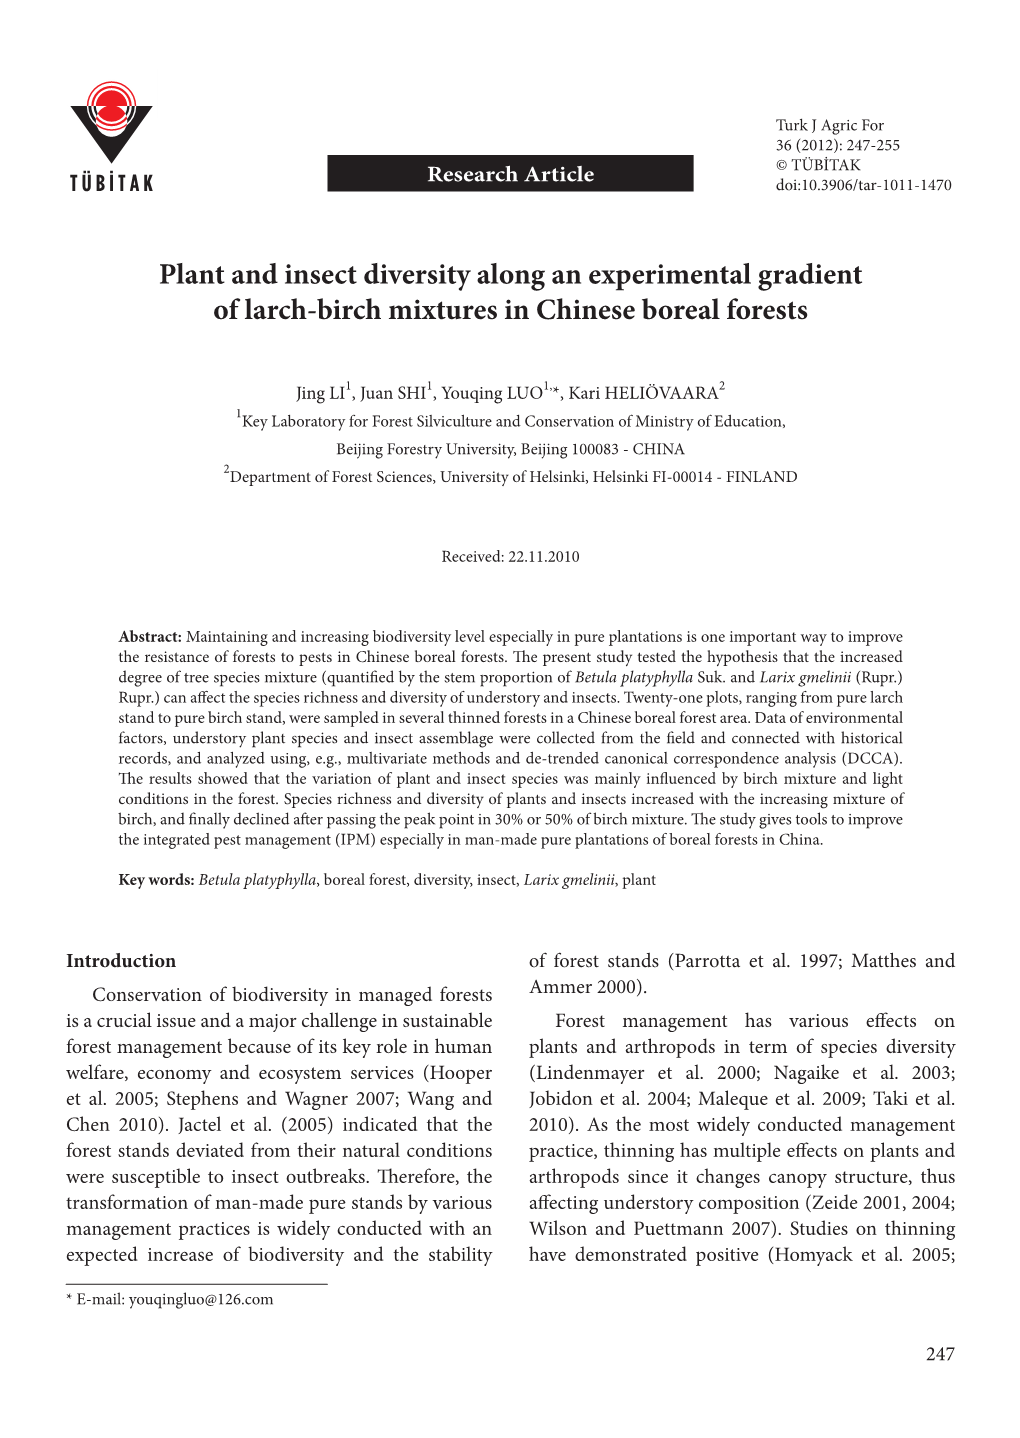 Plant and Insect Diversity Along an Experimental Gradient of Larch-Birch Mixtures in Chinese Boreal Forests